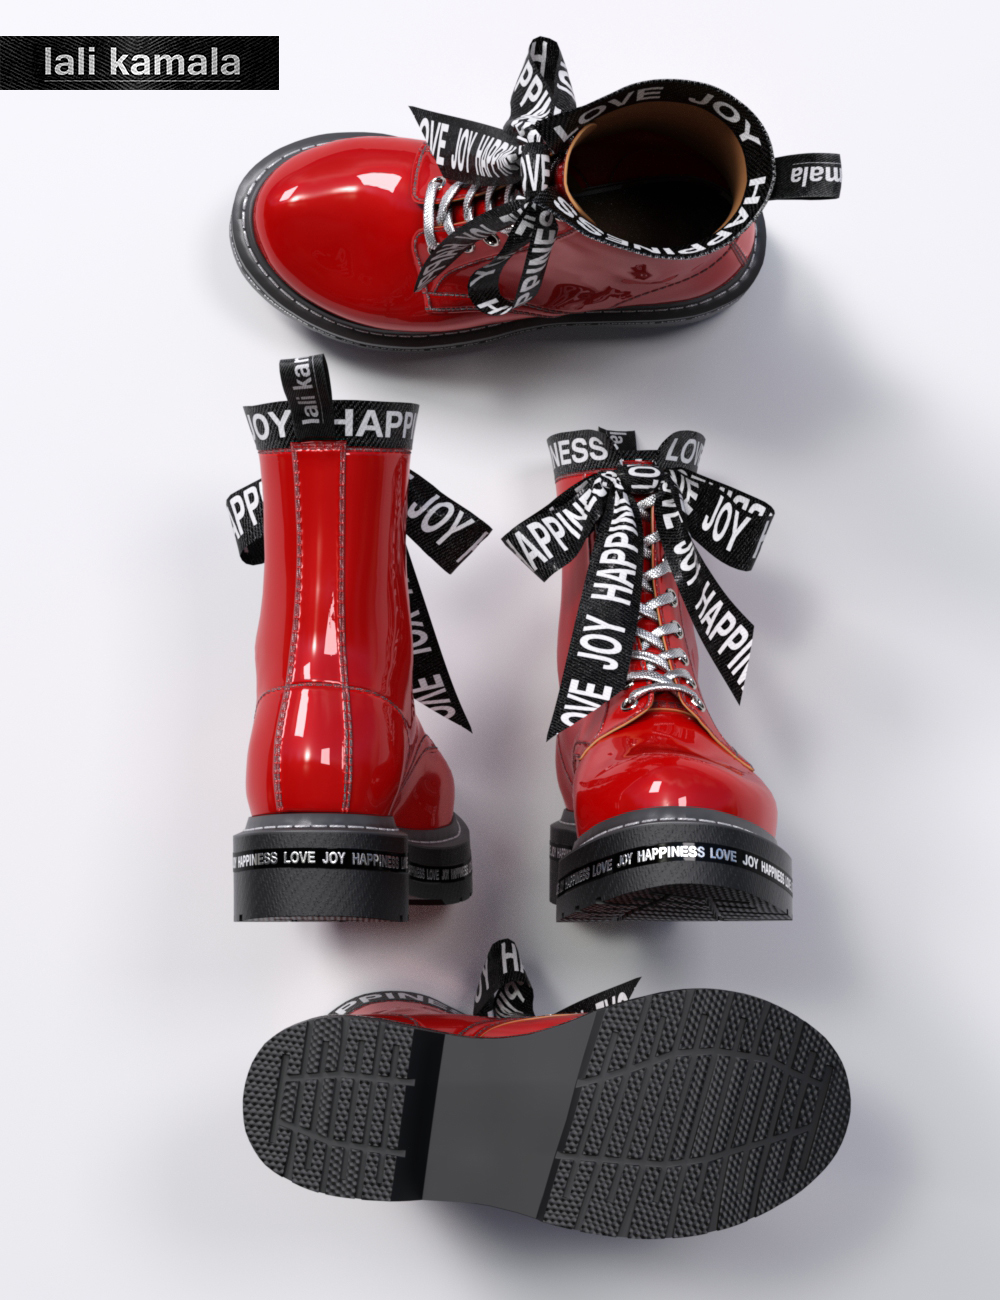 Lali's Boots for Genesis 8.1 Females by: Lali Kamala, 3D Models by Daz 3D